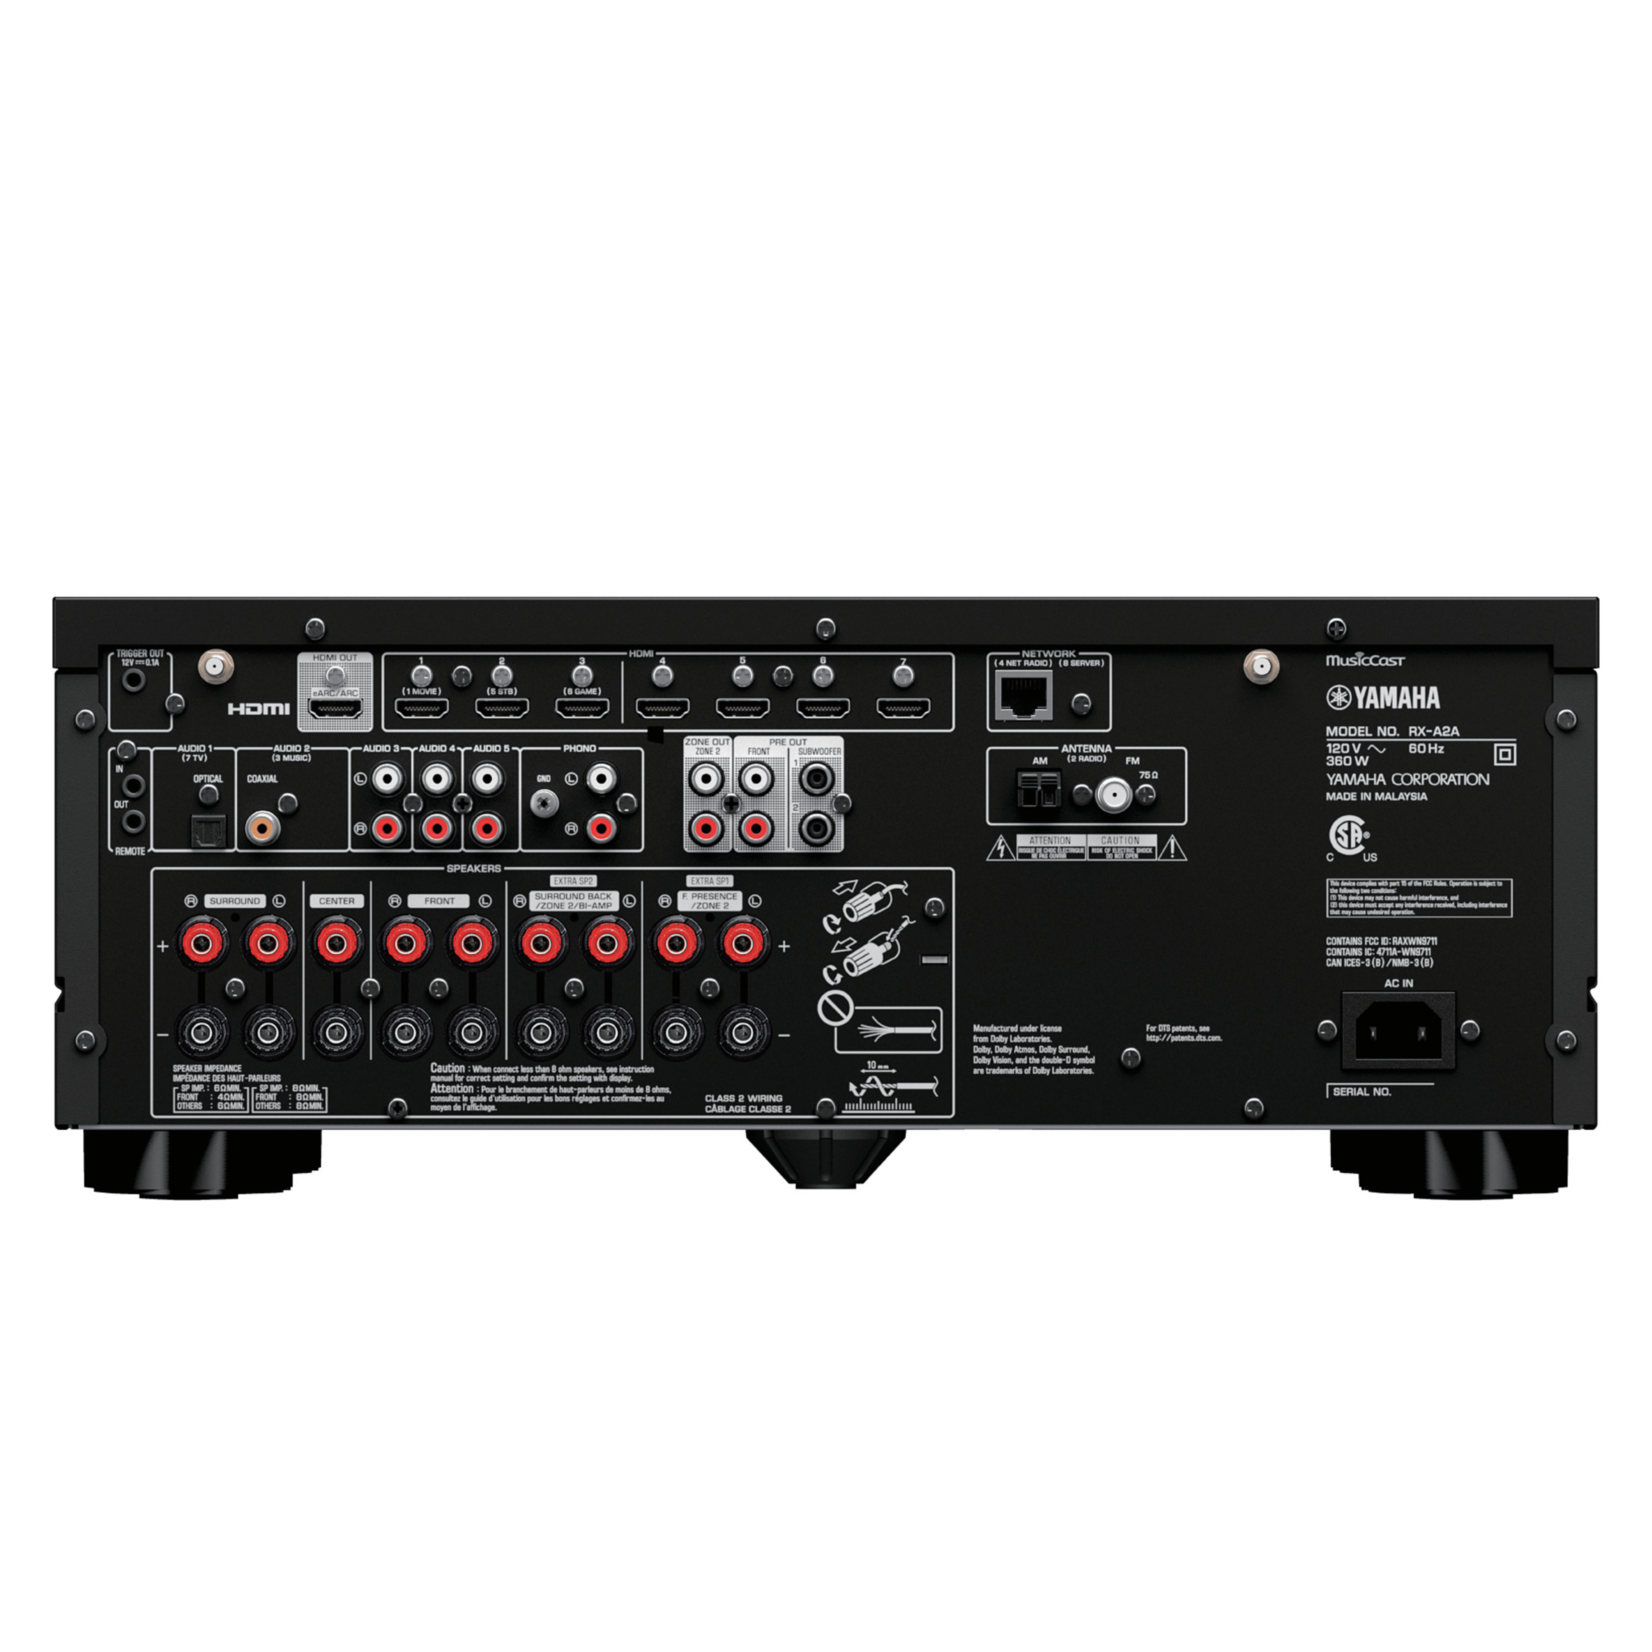 Yamaha Yamaha RX-A2A Aventage 7.2-Channel AV Receiver with 8K HDMI and MusicCast